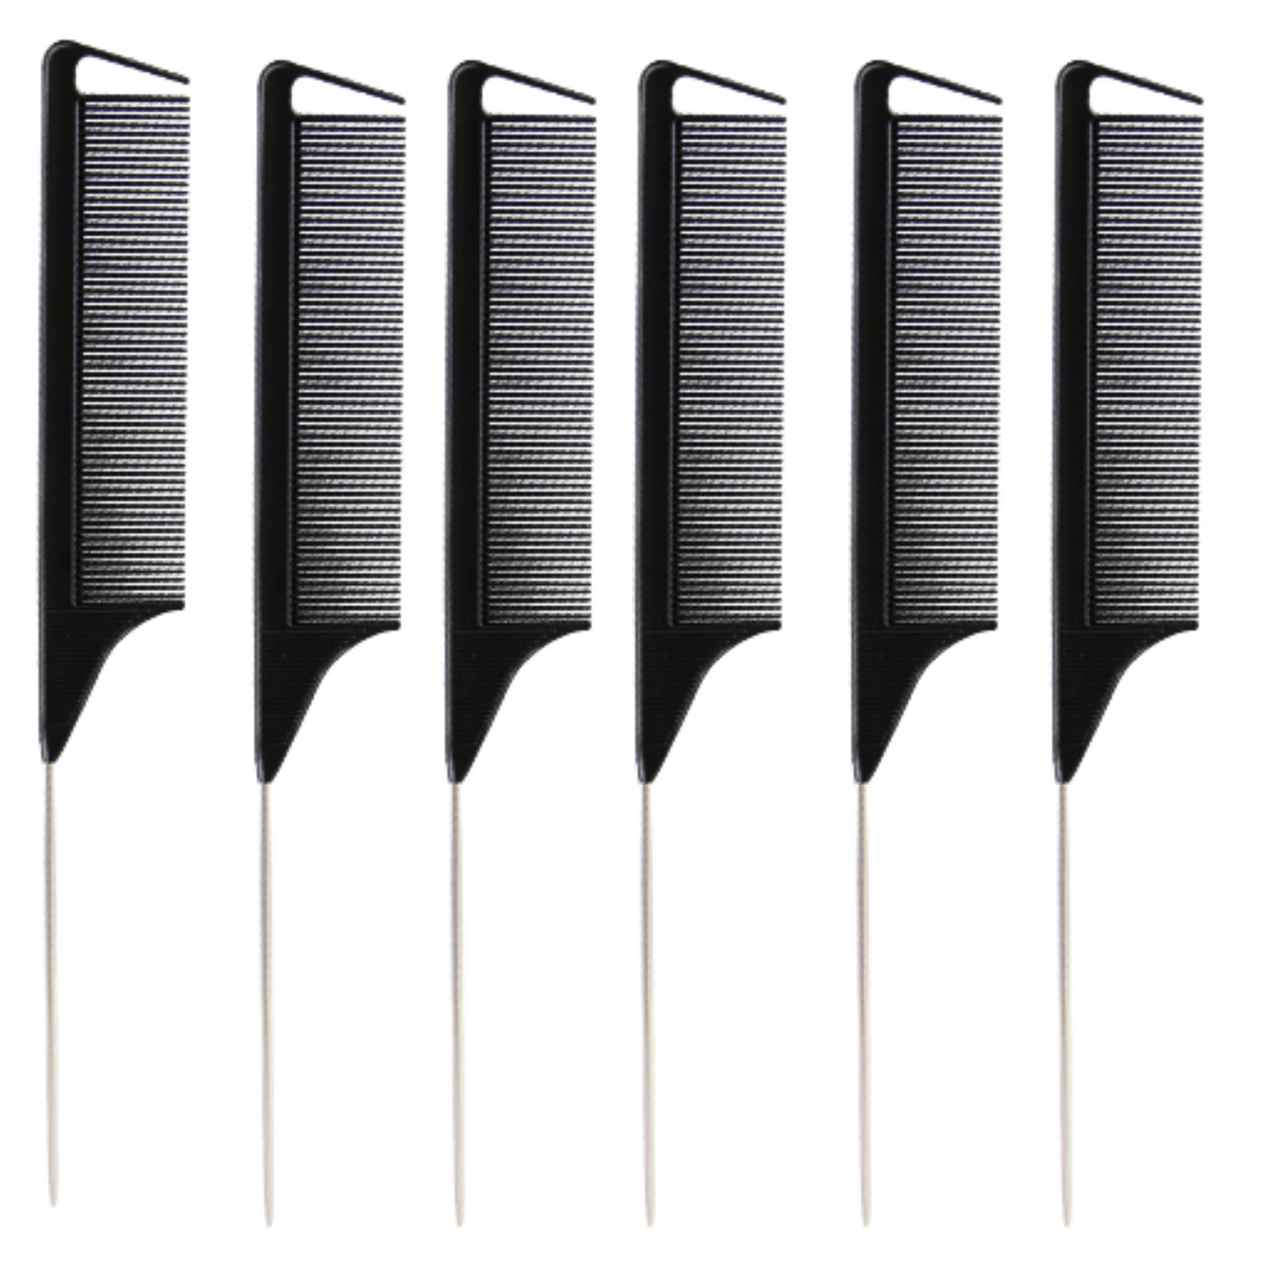 6 PC Yellow Rat Tail Styling Comb with Stainless Steel Pintail